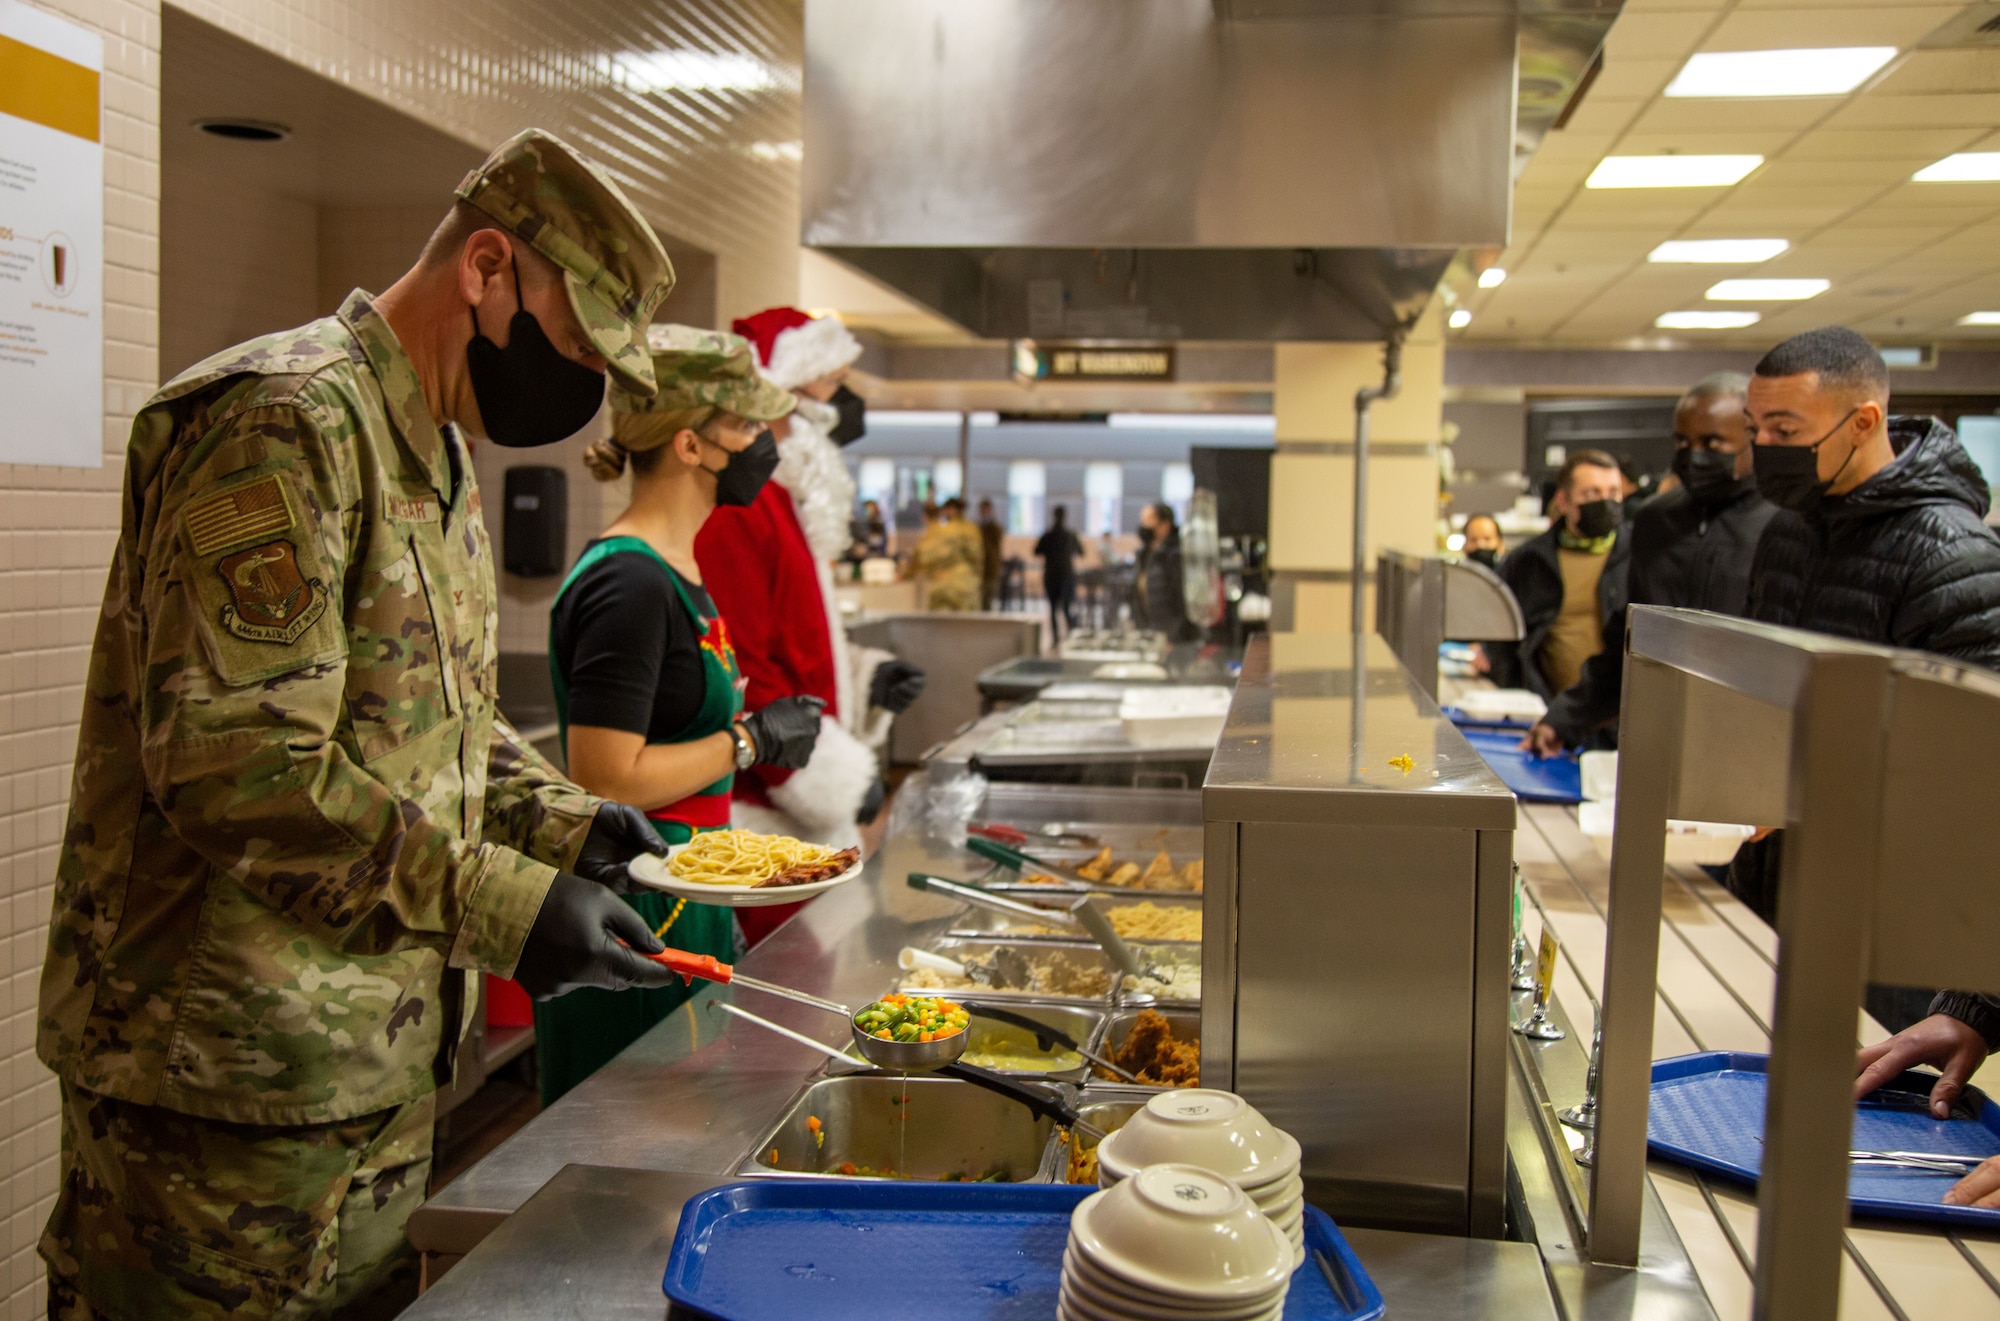 A military leader, an elf and a Santa serve food to patrons in dining facility.